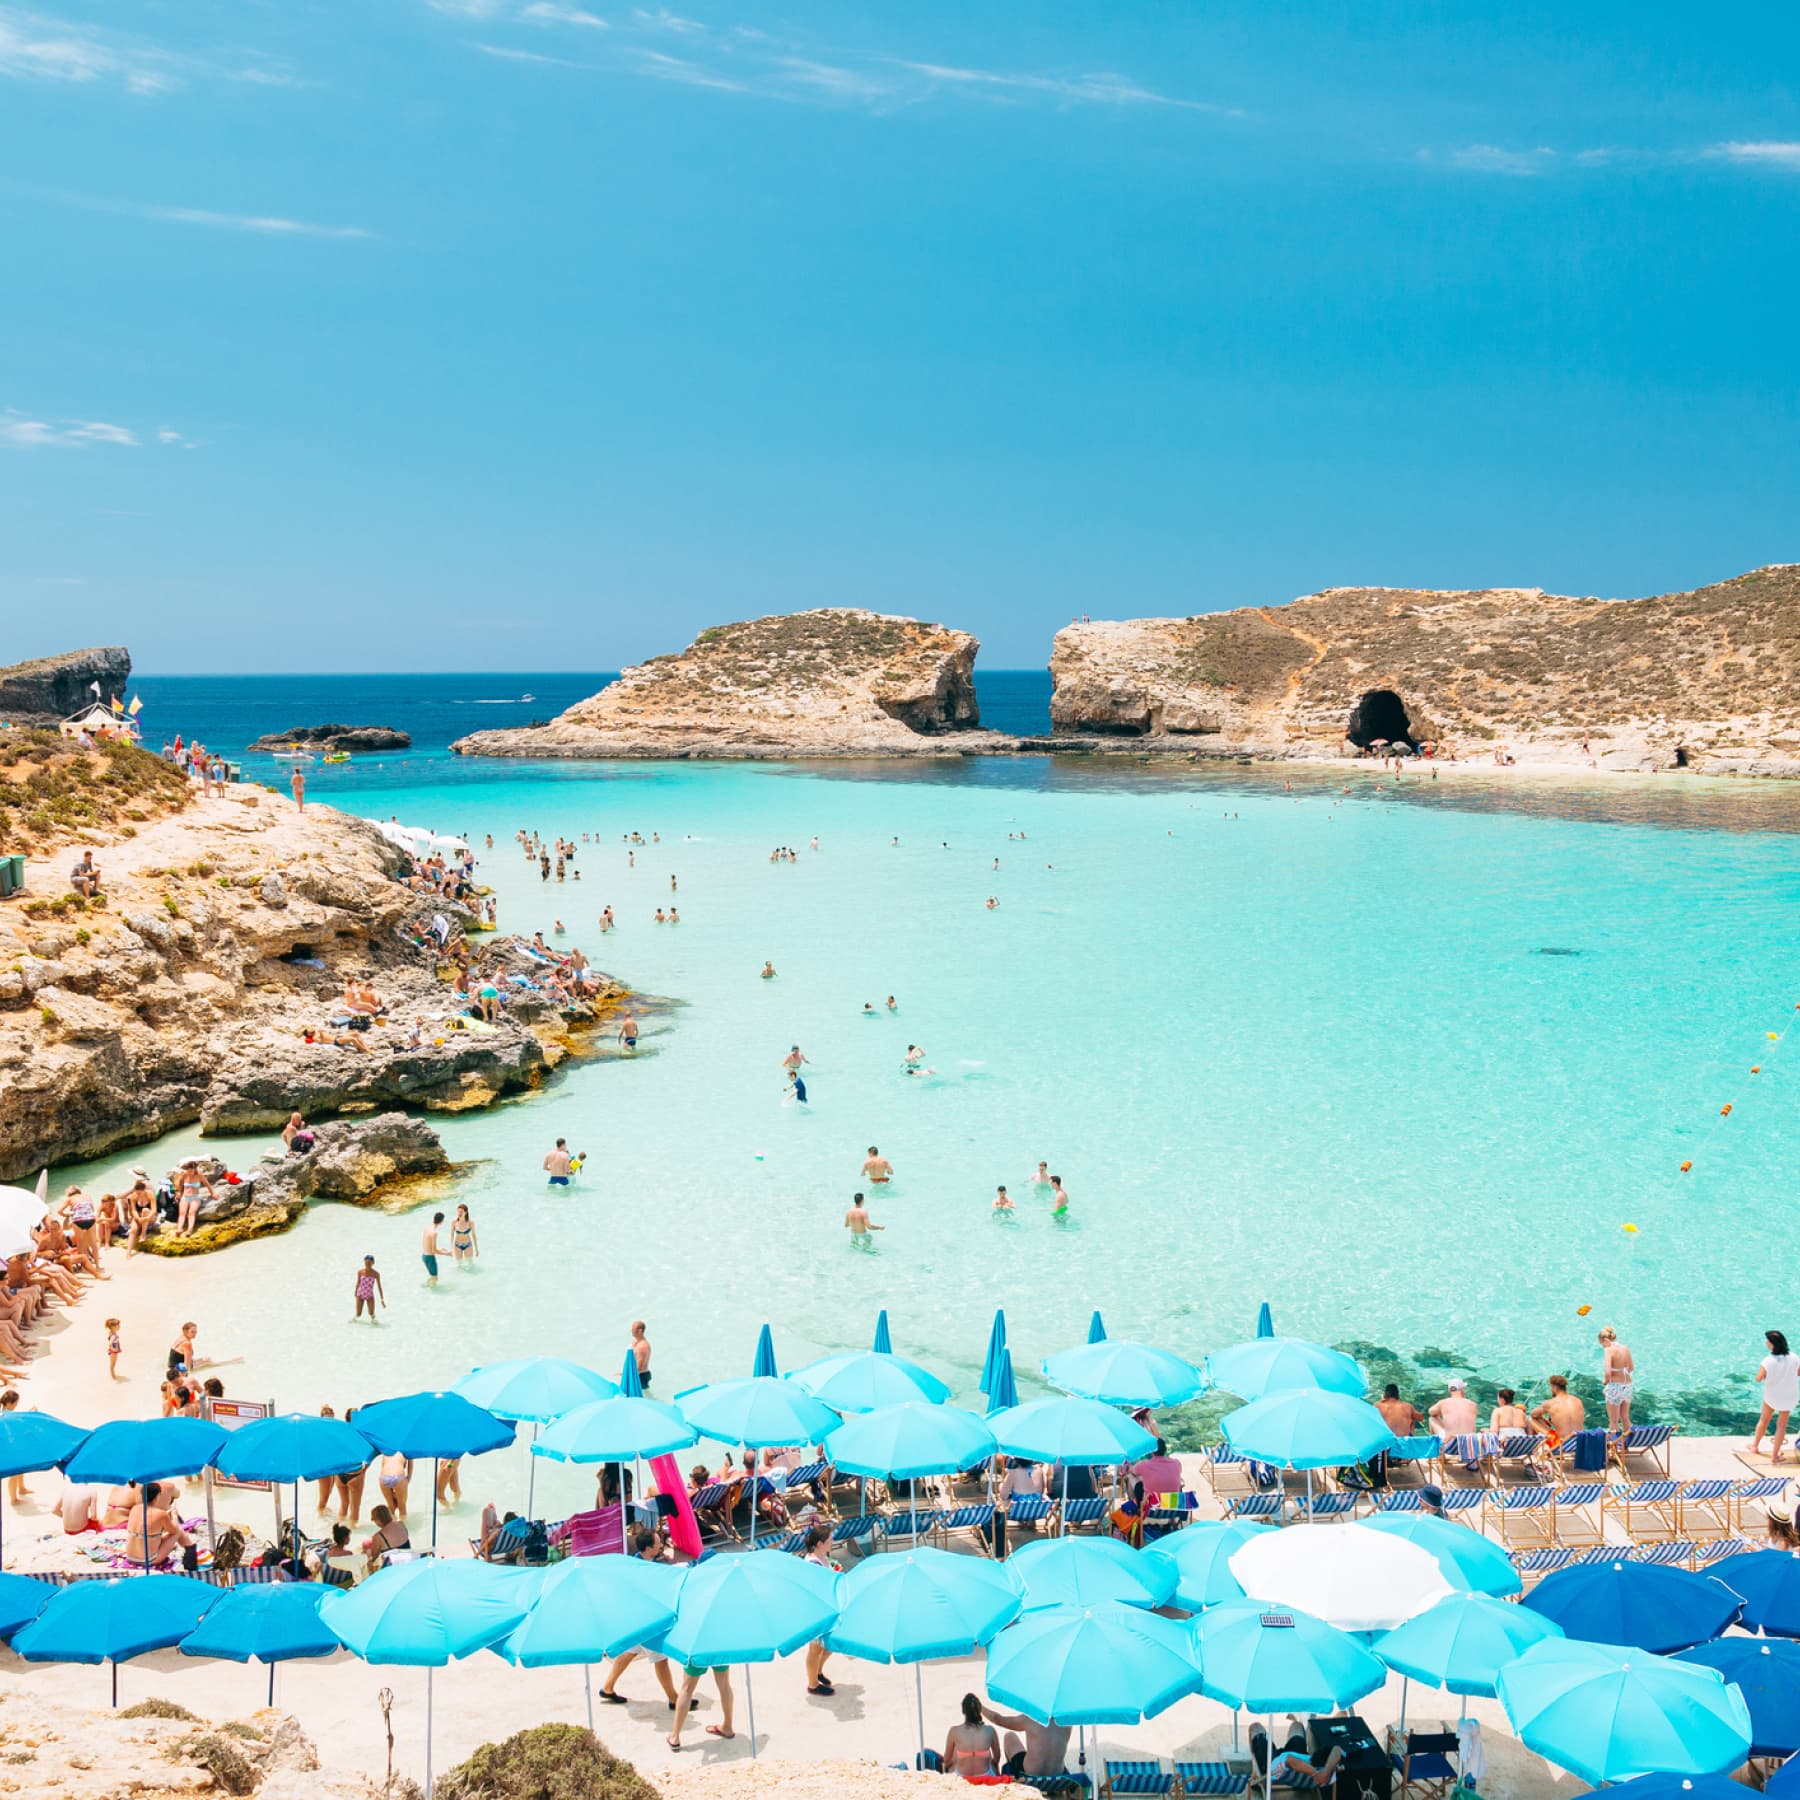 Malta makes for great half term breaks for you and the family